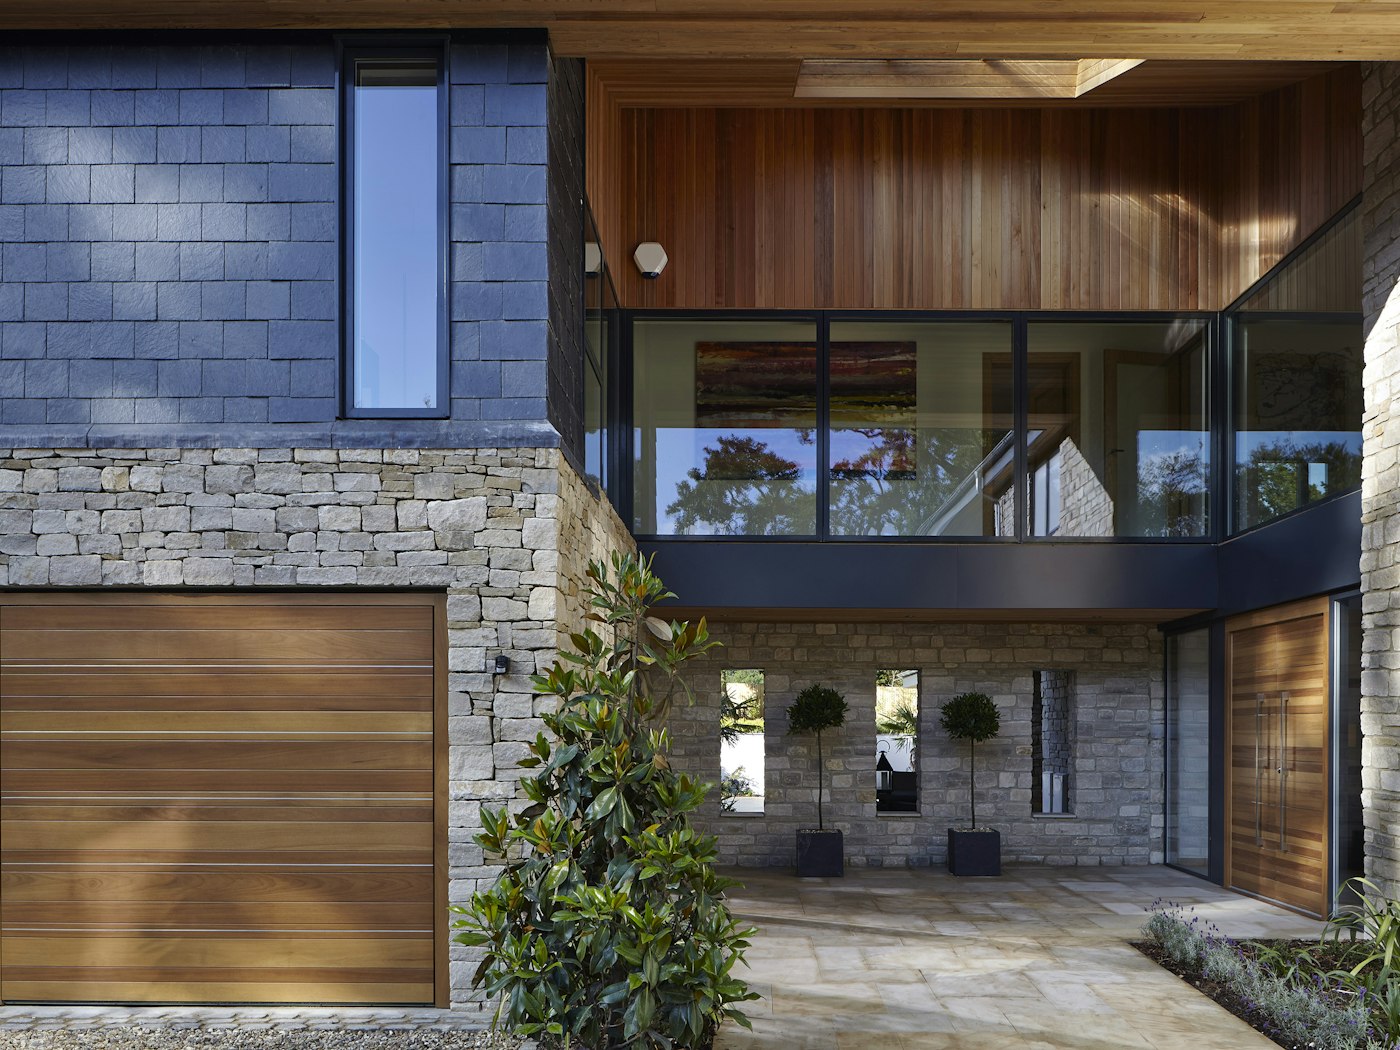 This house features mixed materials but the hardwood front door still works and matches the garage doors and wood cladding